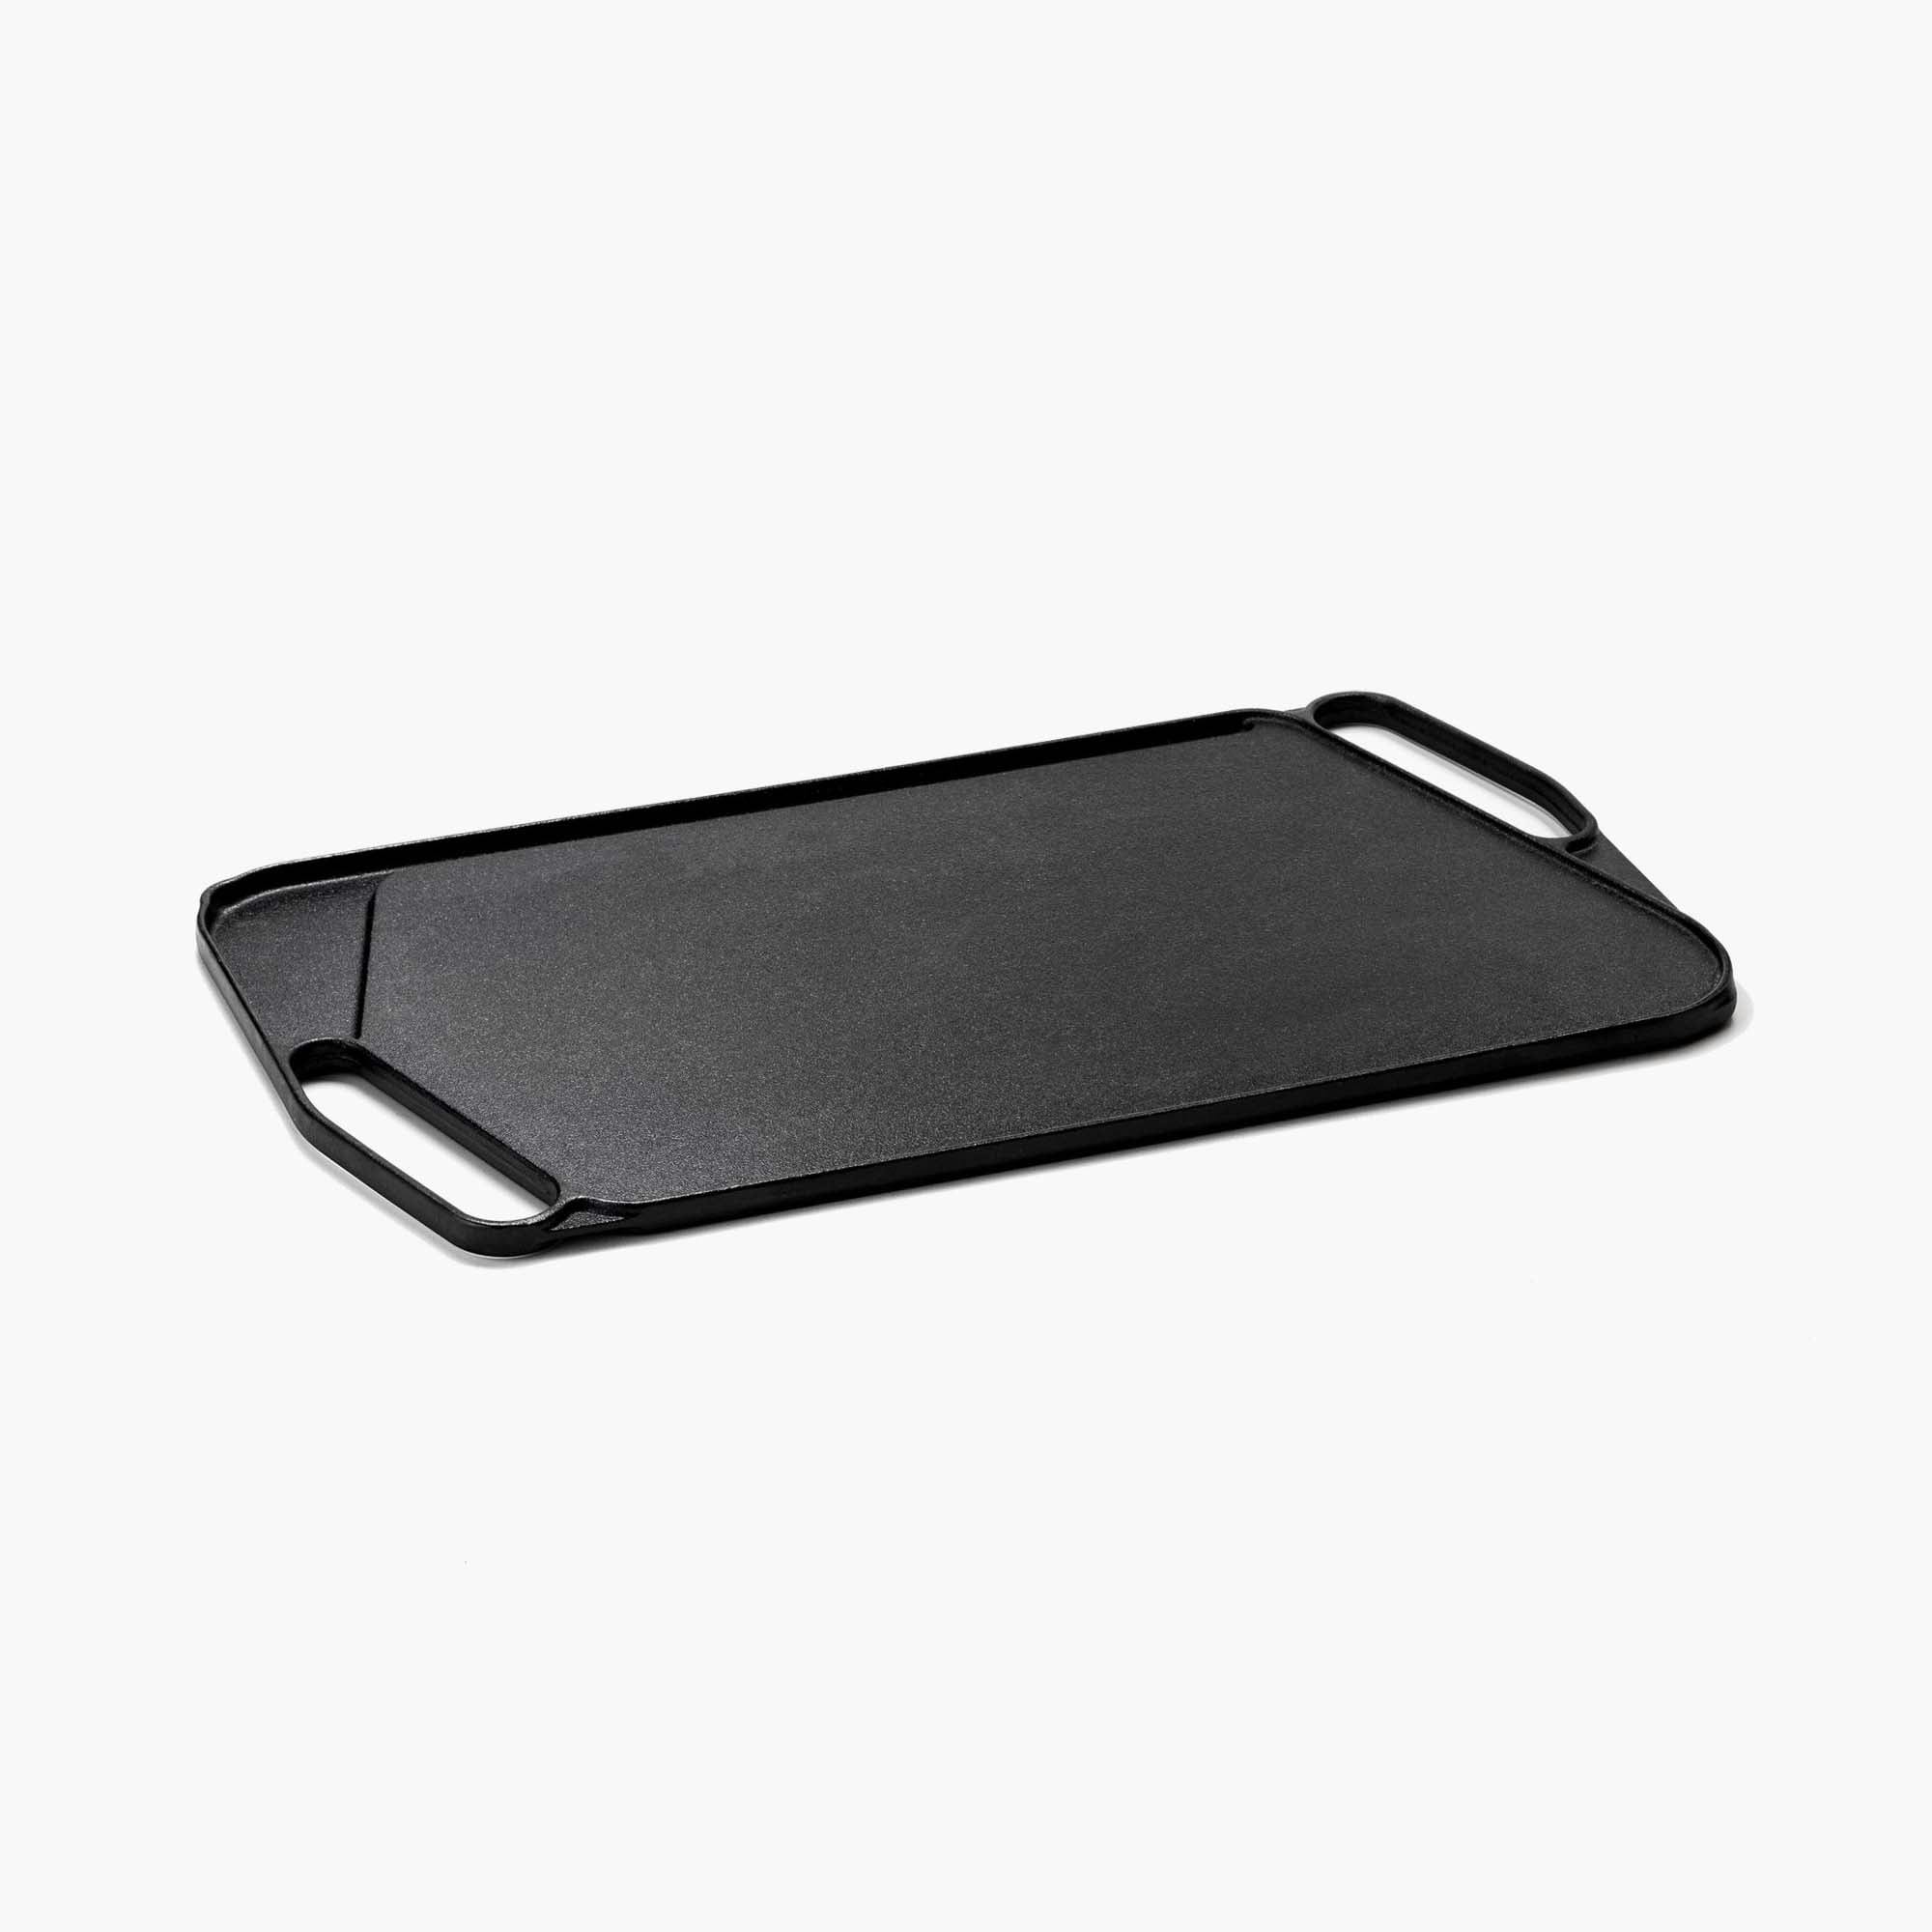 Reversible Cast Iron Griddle for Versatile Cooking, 21" x 11"